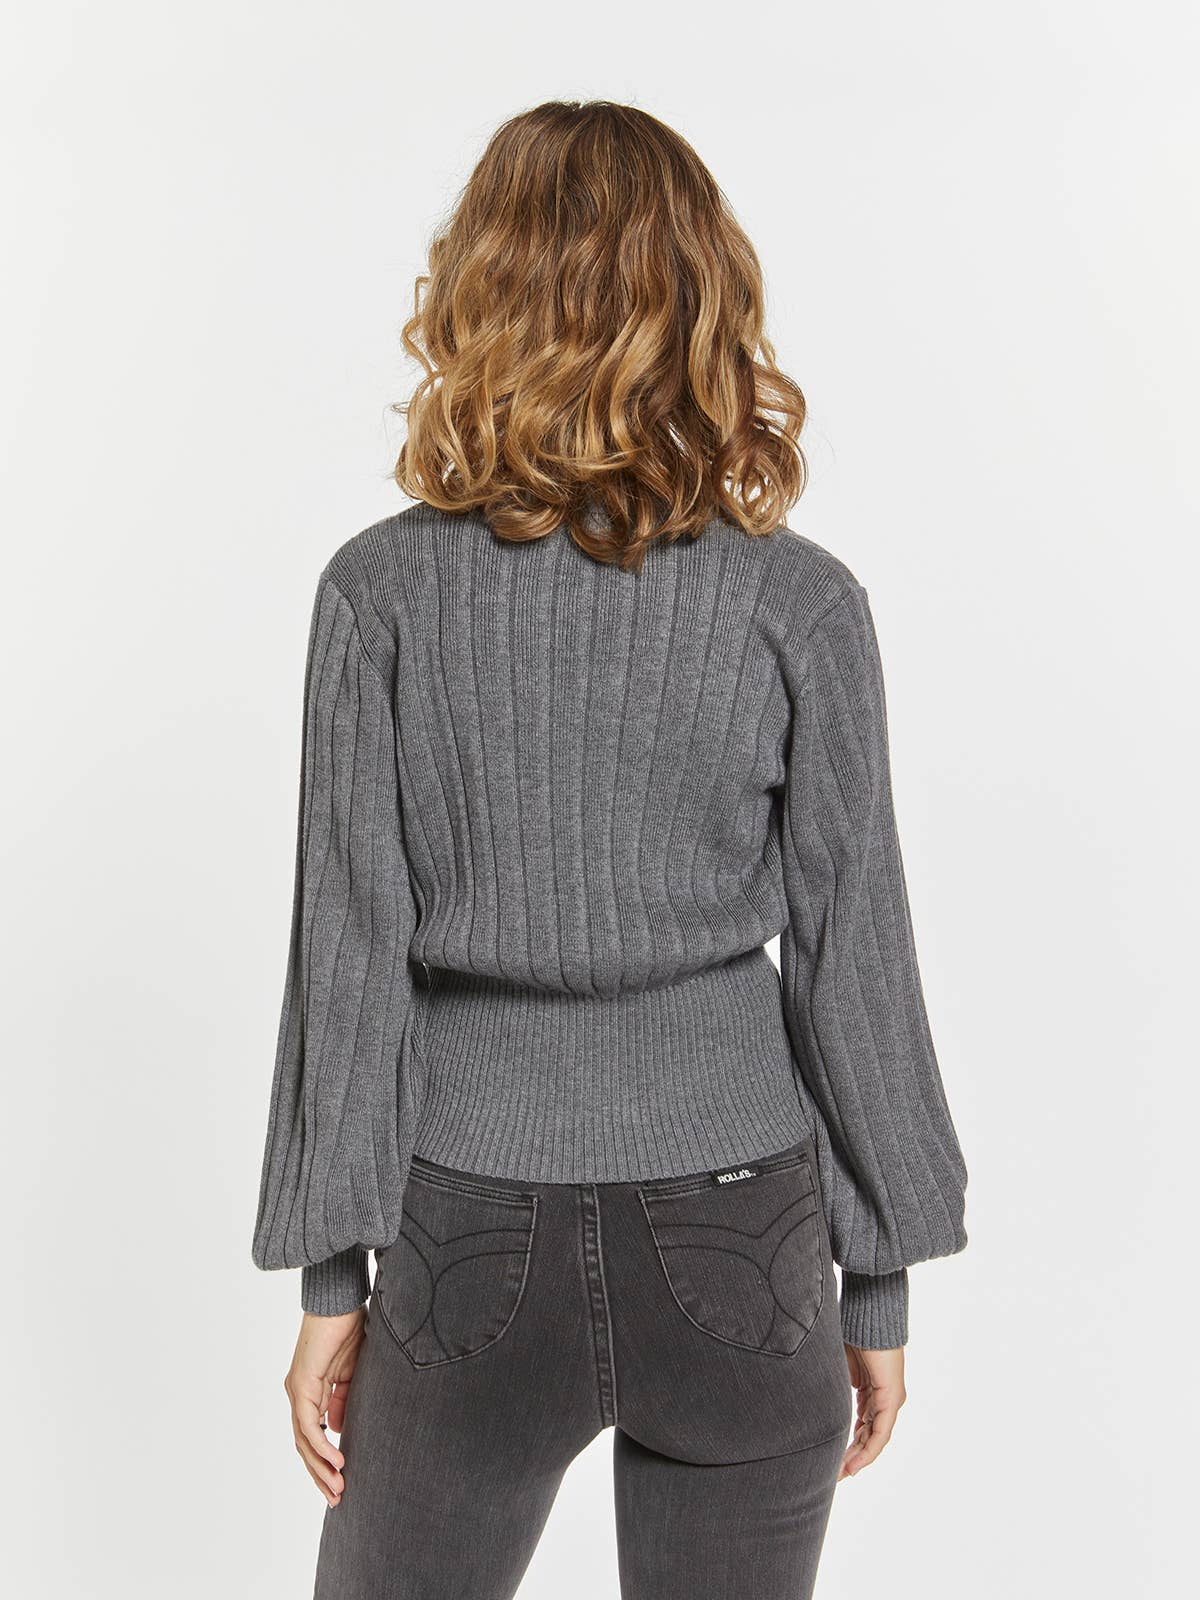 Heather Grey Ribbed Knit Sweater - Mae Sweater Fall-Winter Weekend Los Angeles